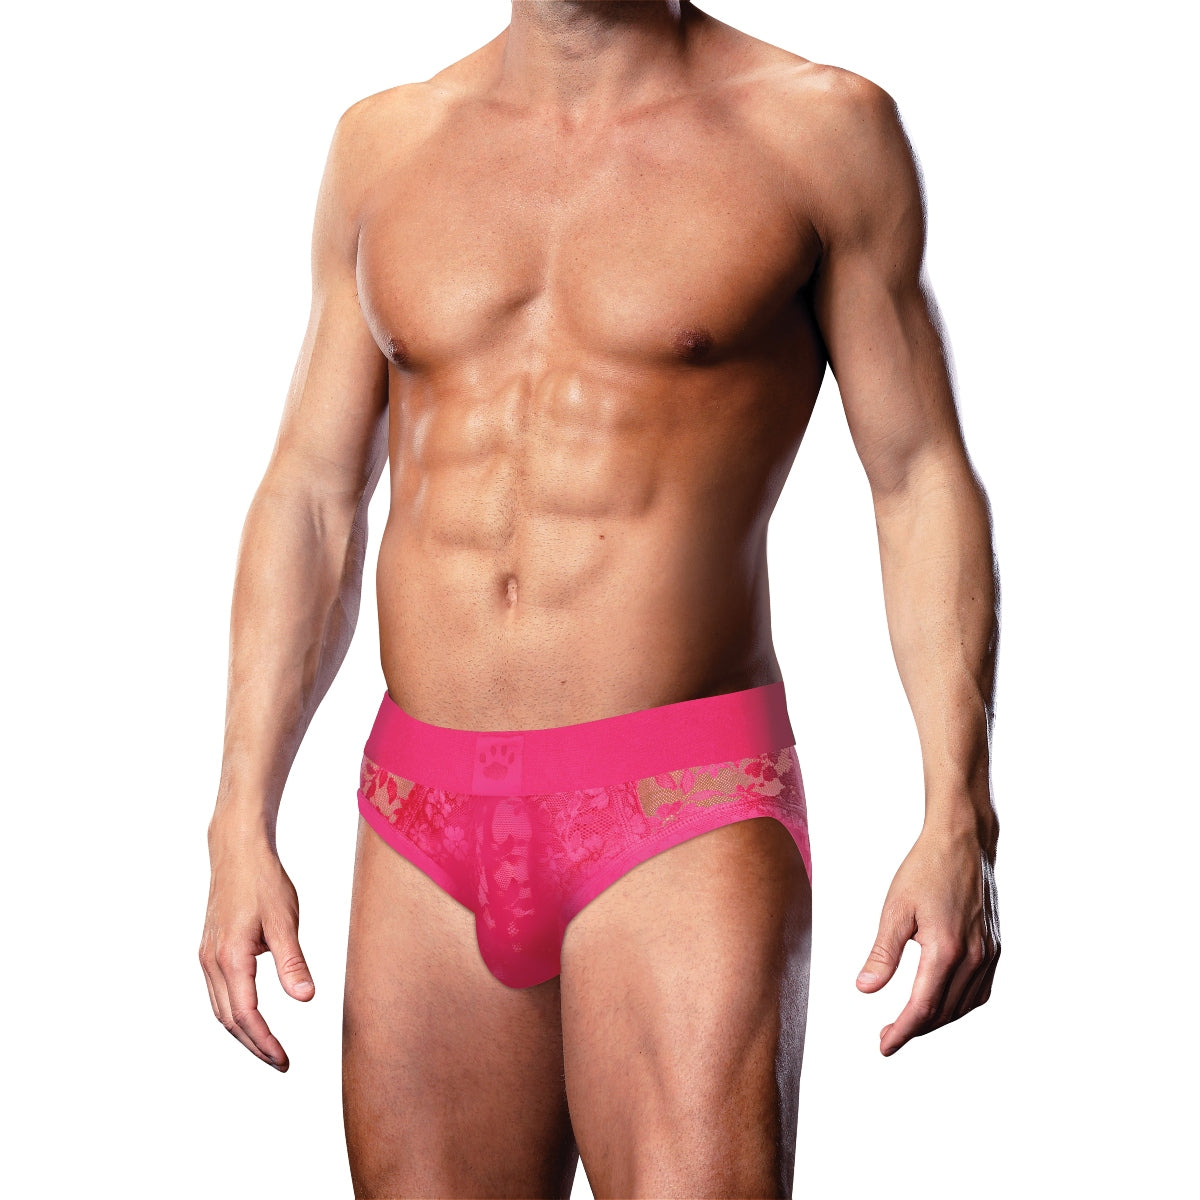 Prowler Lace Open Back Brief Pink (8206196834543)